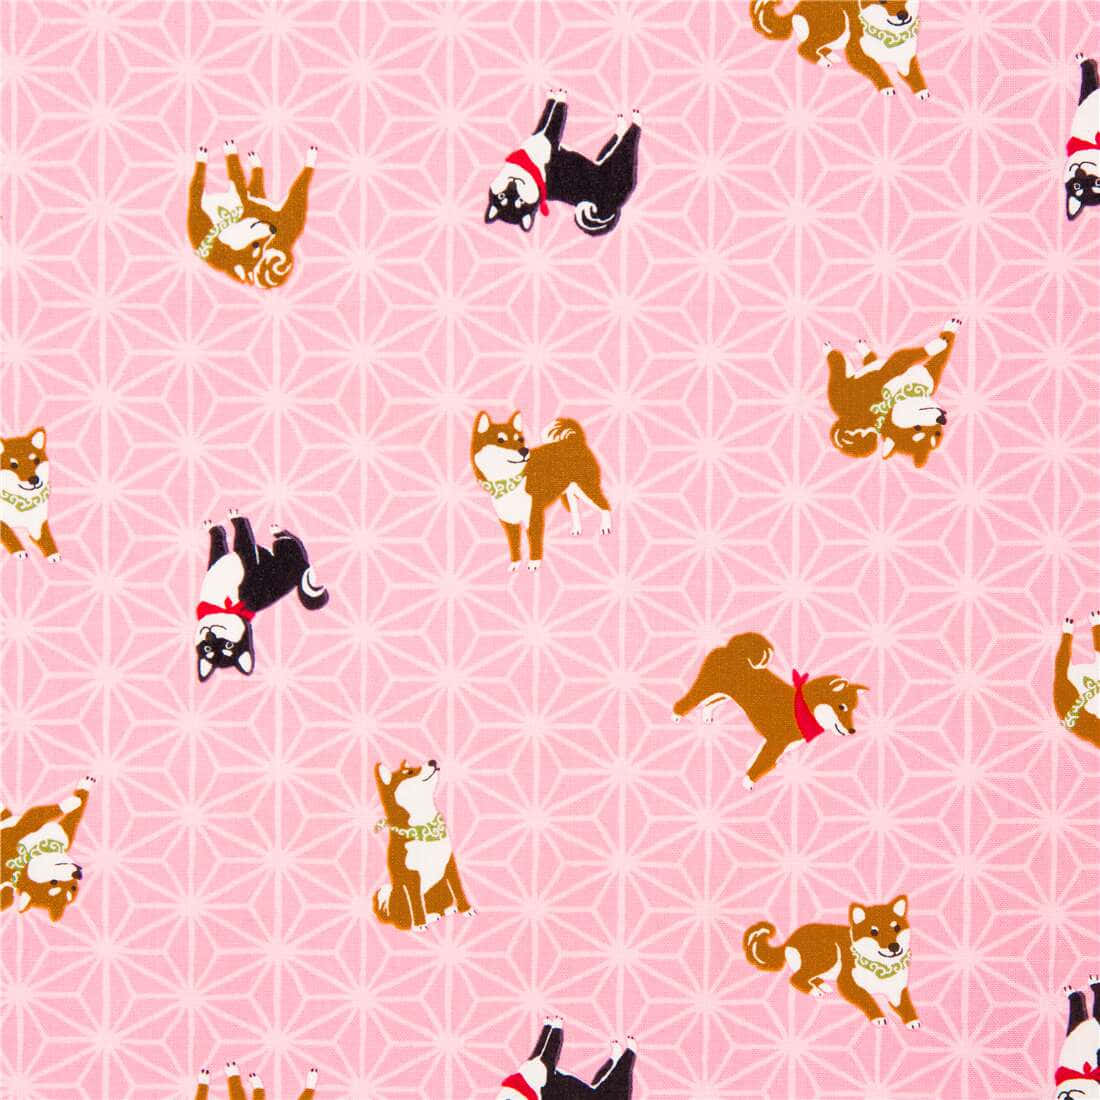 Two lovely pink puppies cuddled up together. Wallpaper